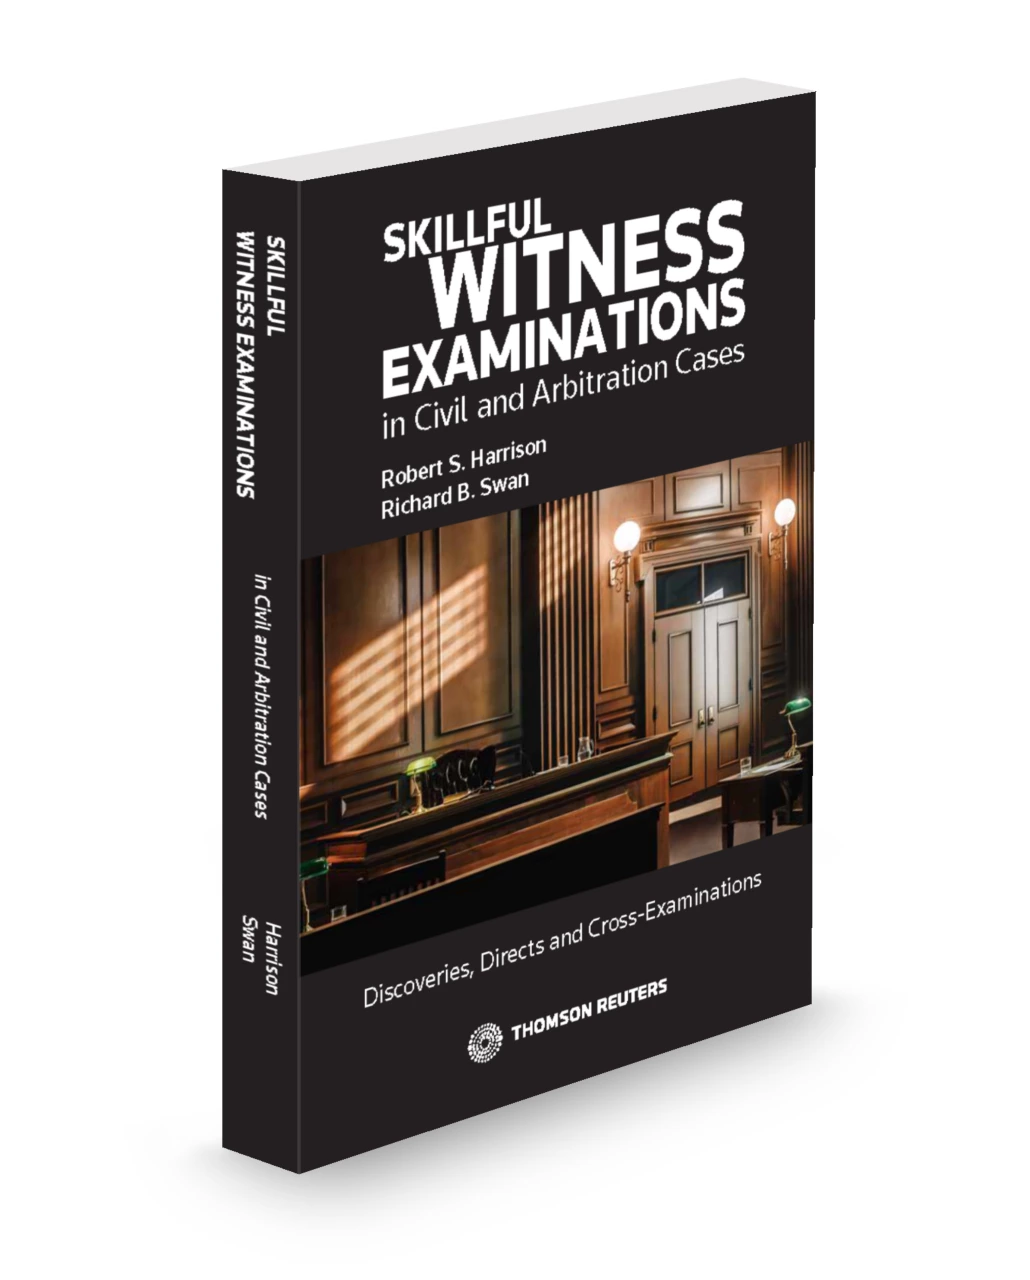 Skillful Witness Examinations in Civil and Arbitration Cases